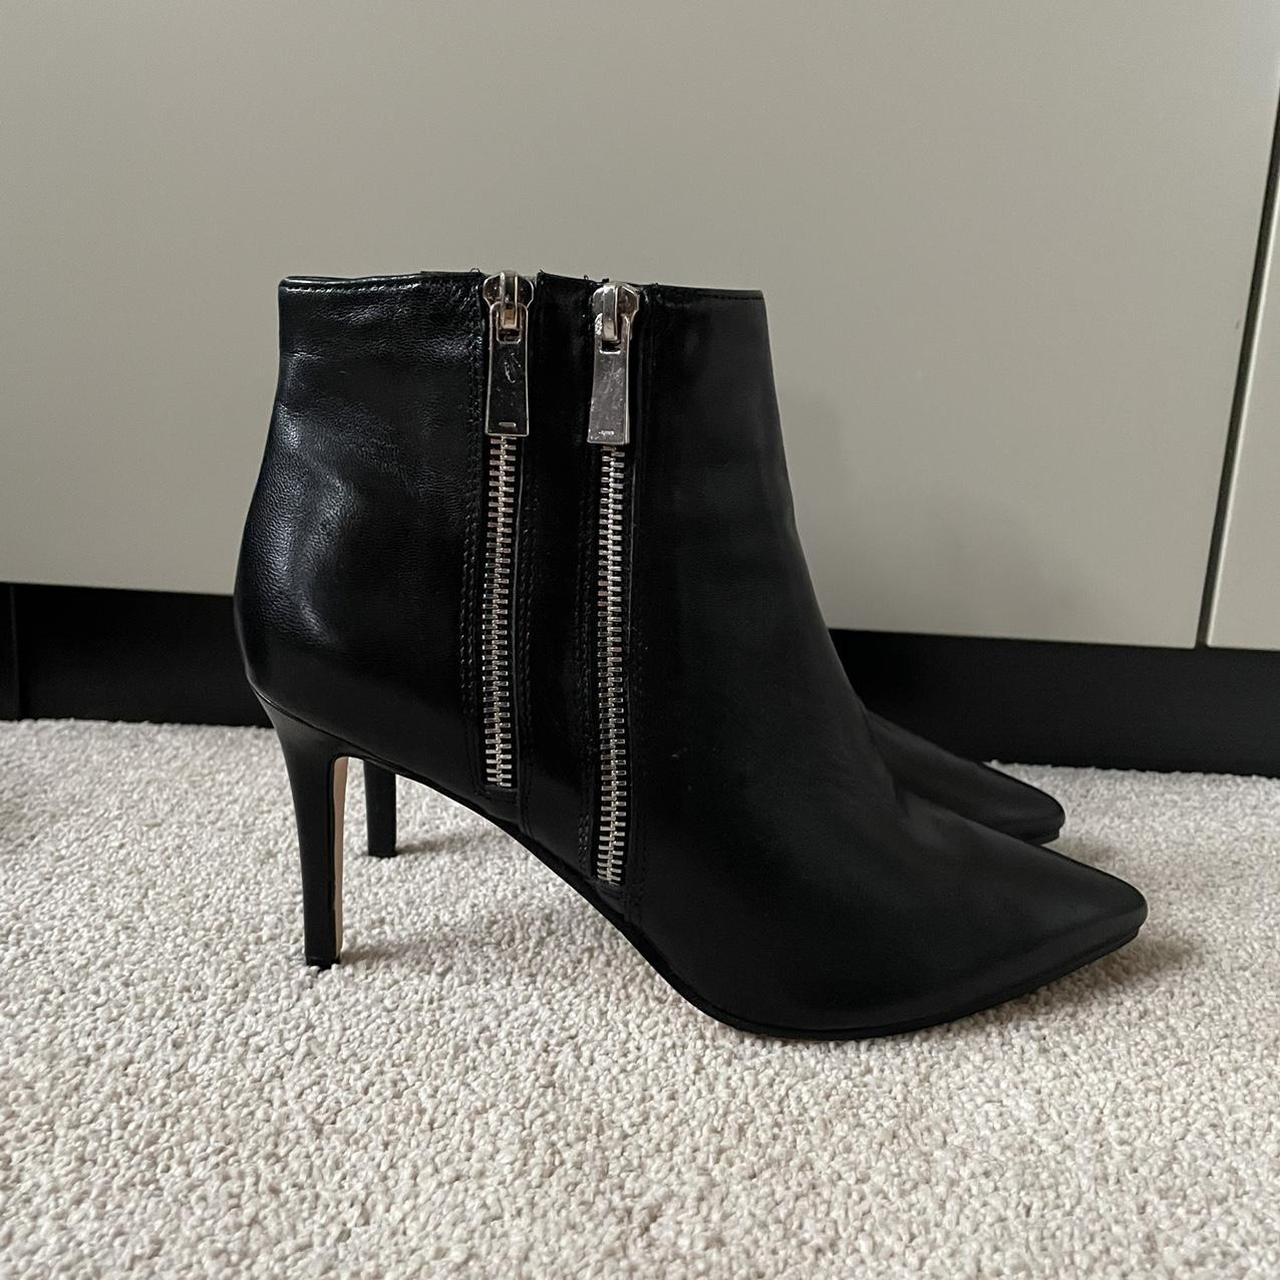 Dune London Black Leather Ankle Boots with Zip... - Depop